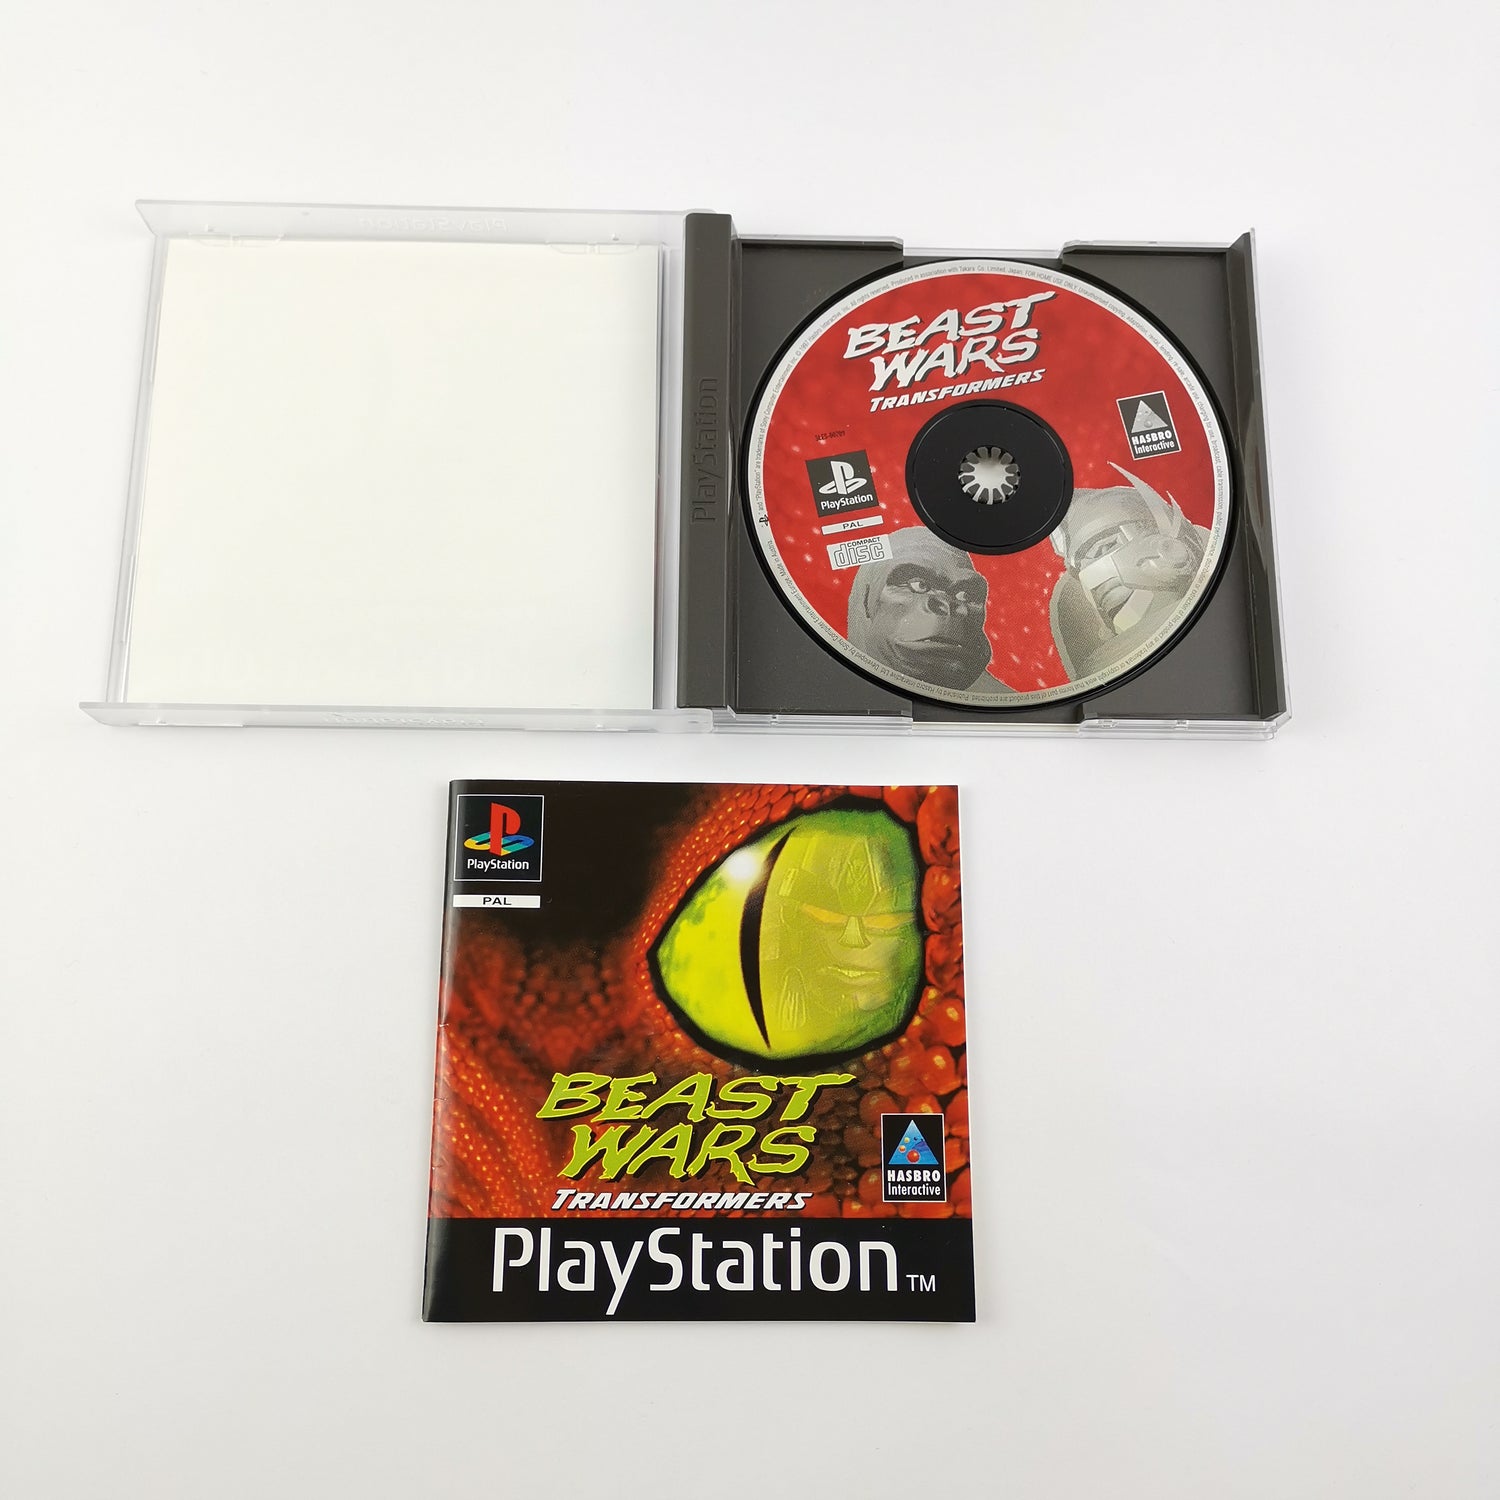 Sony Playstation 1 Game: Beast Wars Transformers - OVP & Instructions PAL PS1 PSX